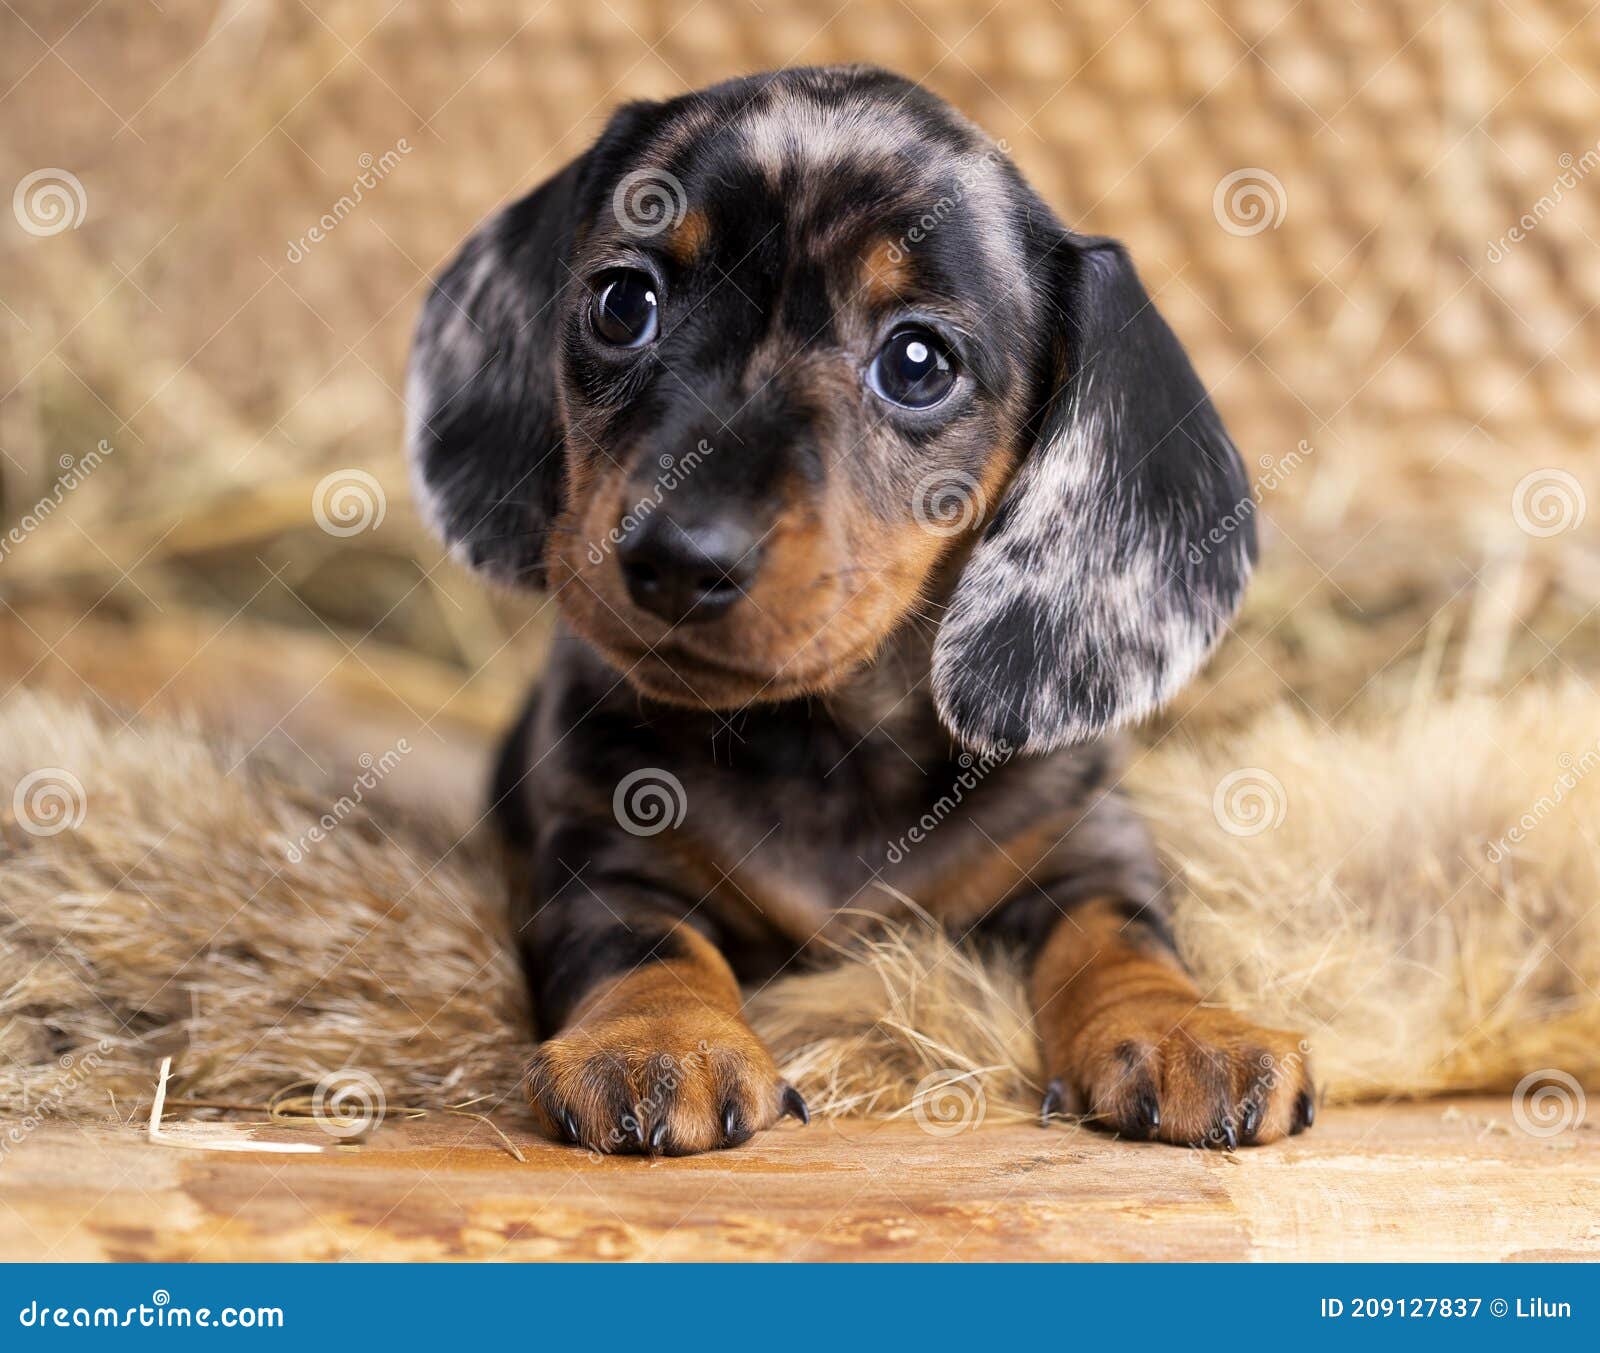 Dachshund Puppy Black Tan Merle Color Sitting In The Hay At The Farm Stock  Image - Image Of Color, Chocolates: 209127837